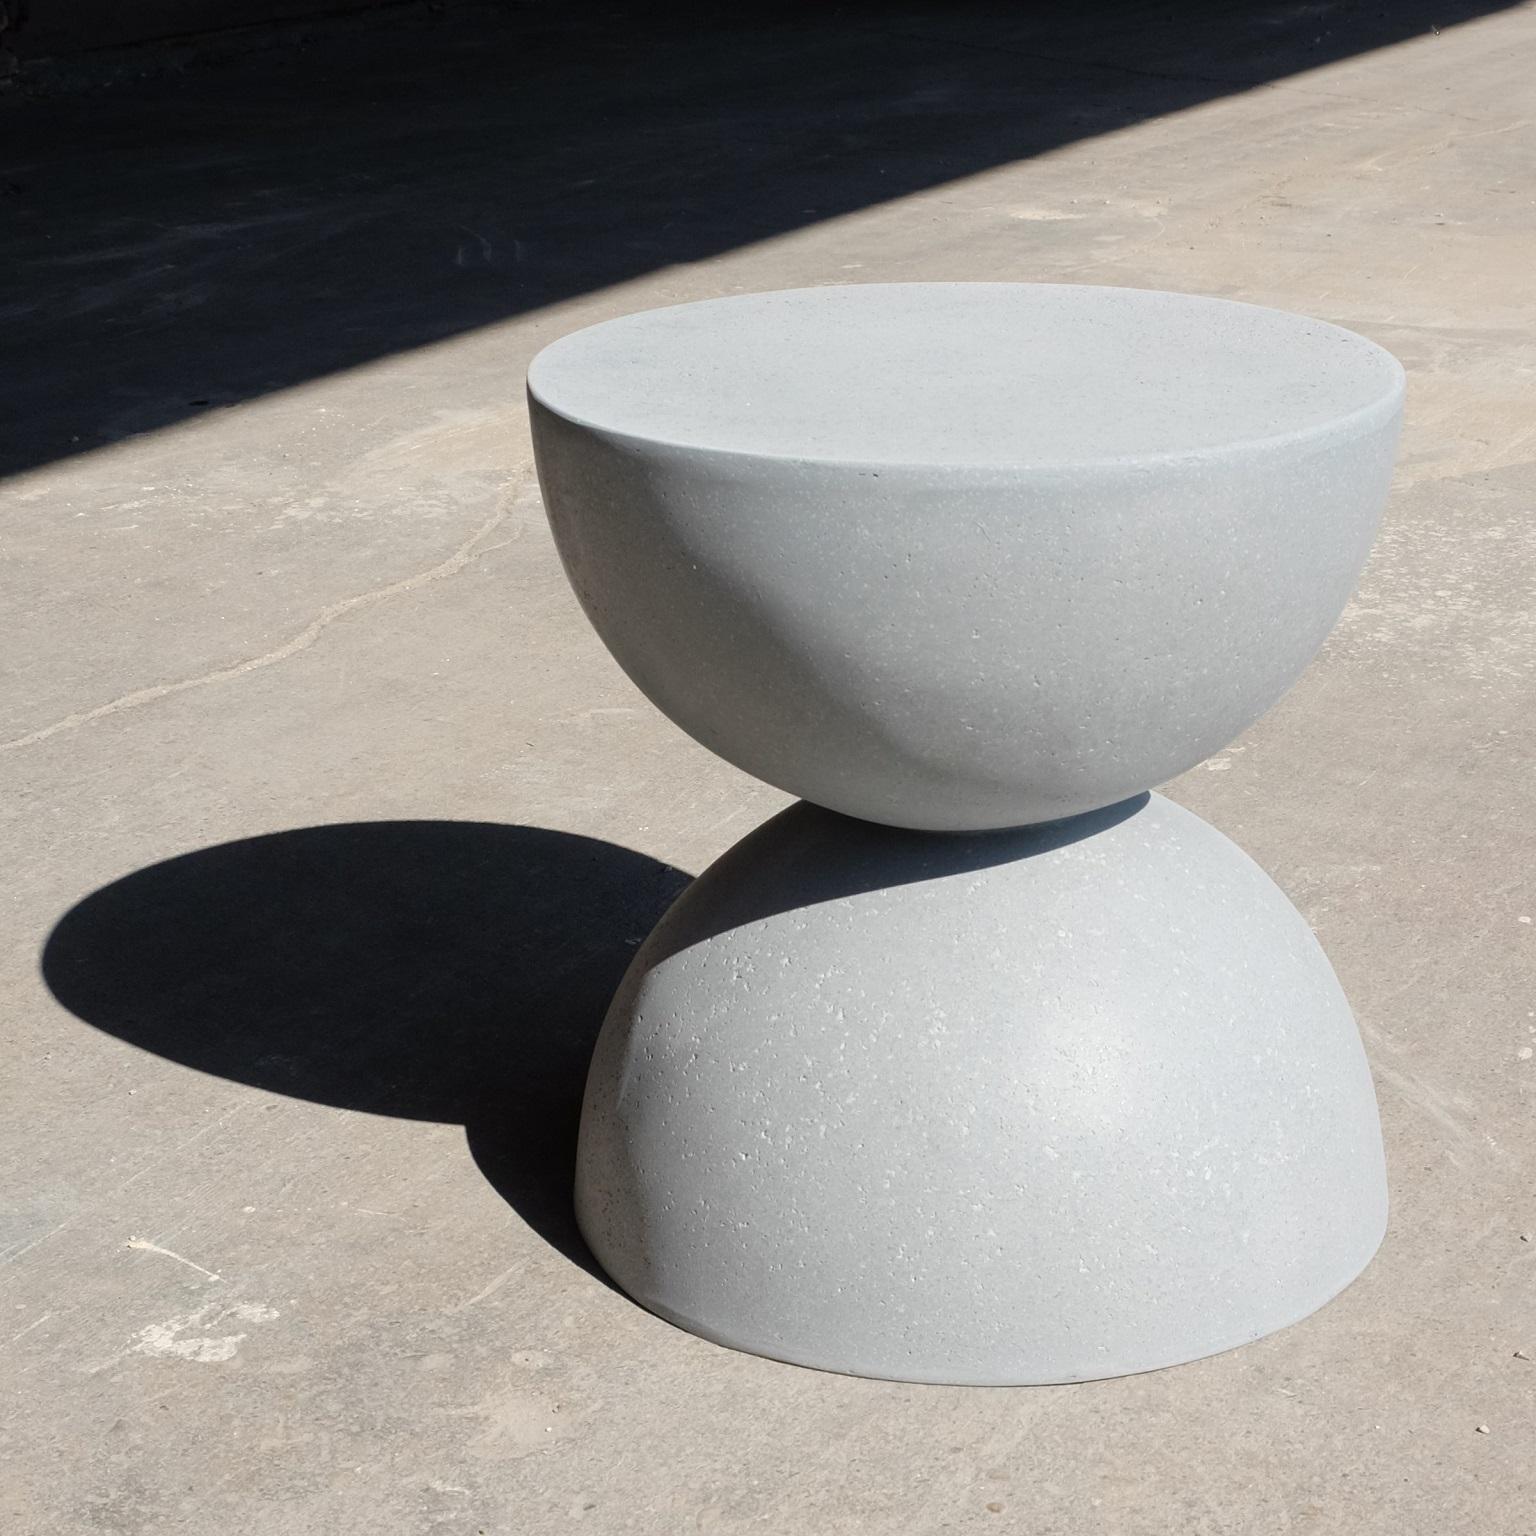 A symmetrical, sculptural balance of elegance and function.

Dimensions: Diameter 15 in. (38 cm), height 16 in. (41 cm). Weight 20 lbs. (9 kg)

Finish color options:
white stone
natural stone
aged stone
keystone (shown)
coal stone

Materials: resin,